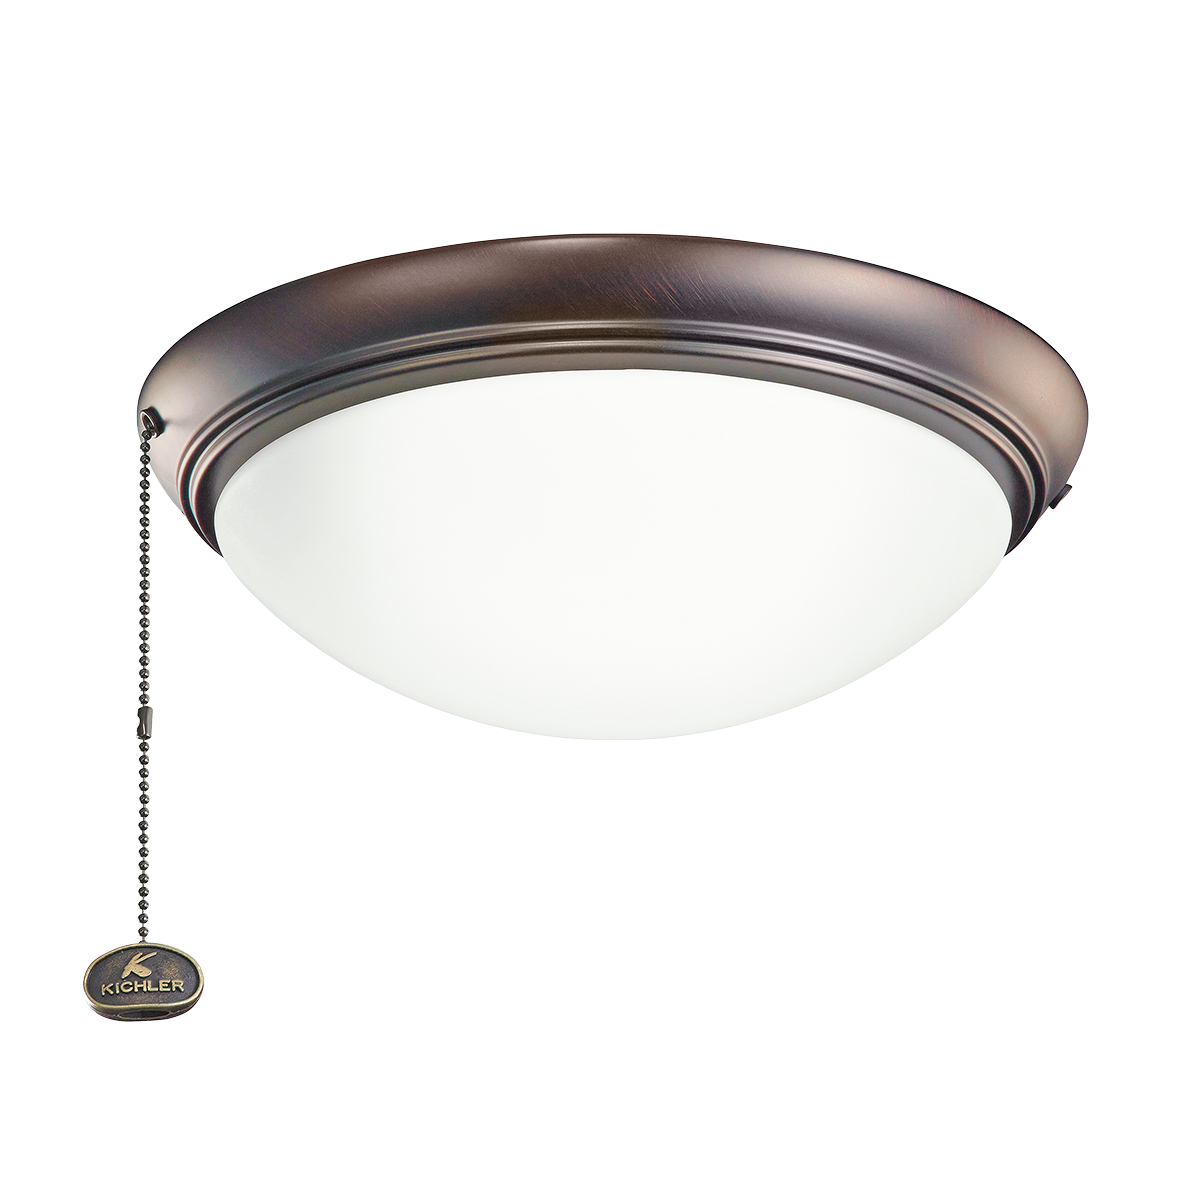 Low profile Etched Cased Opal LED Ceiling Fan fixture in Oil Brushed Bronze